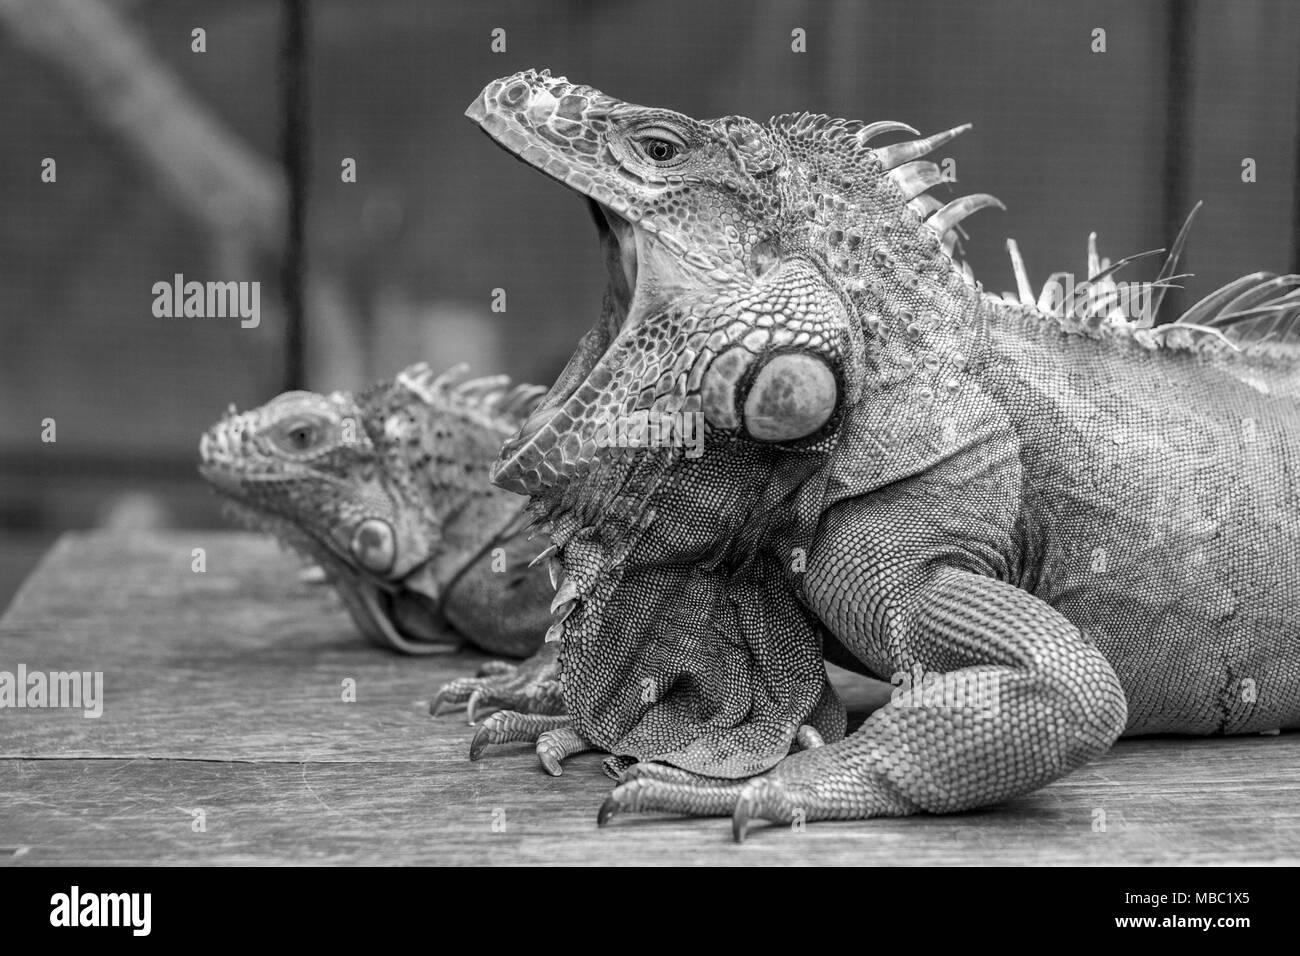 Yawning Iguana picture in black and white Stock Photo